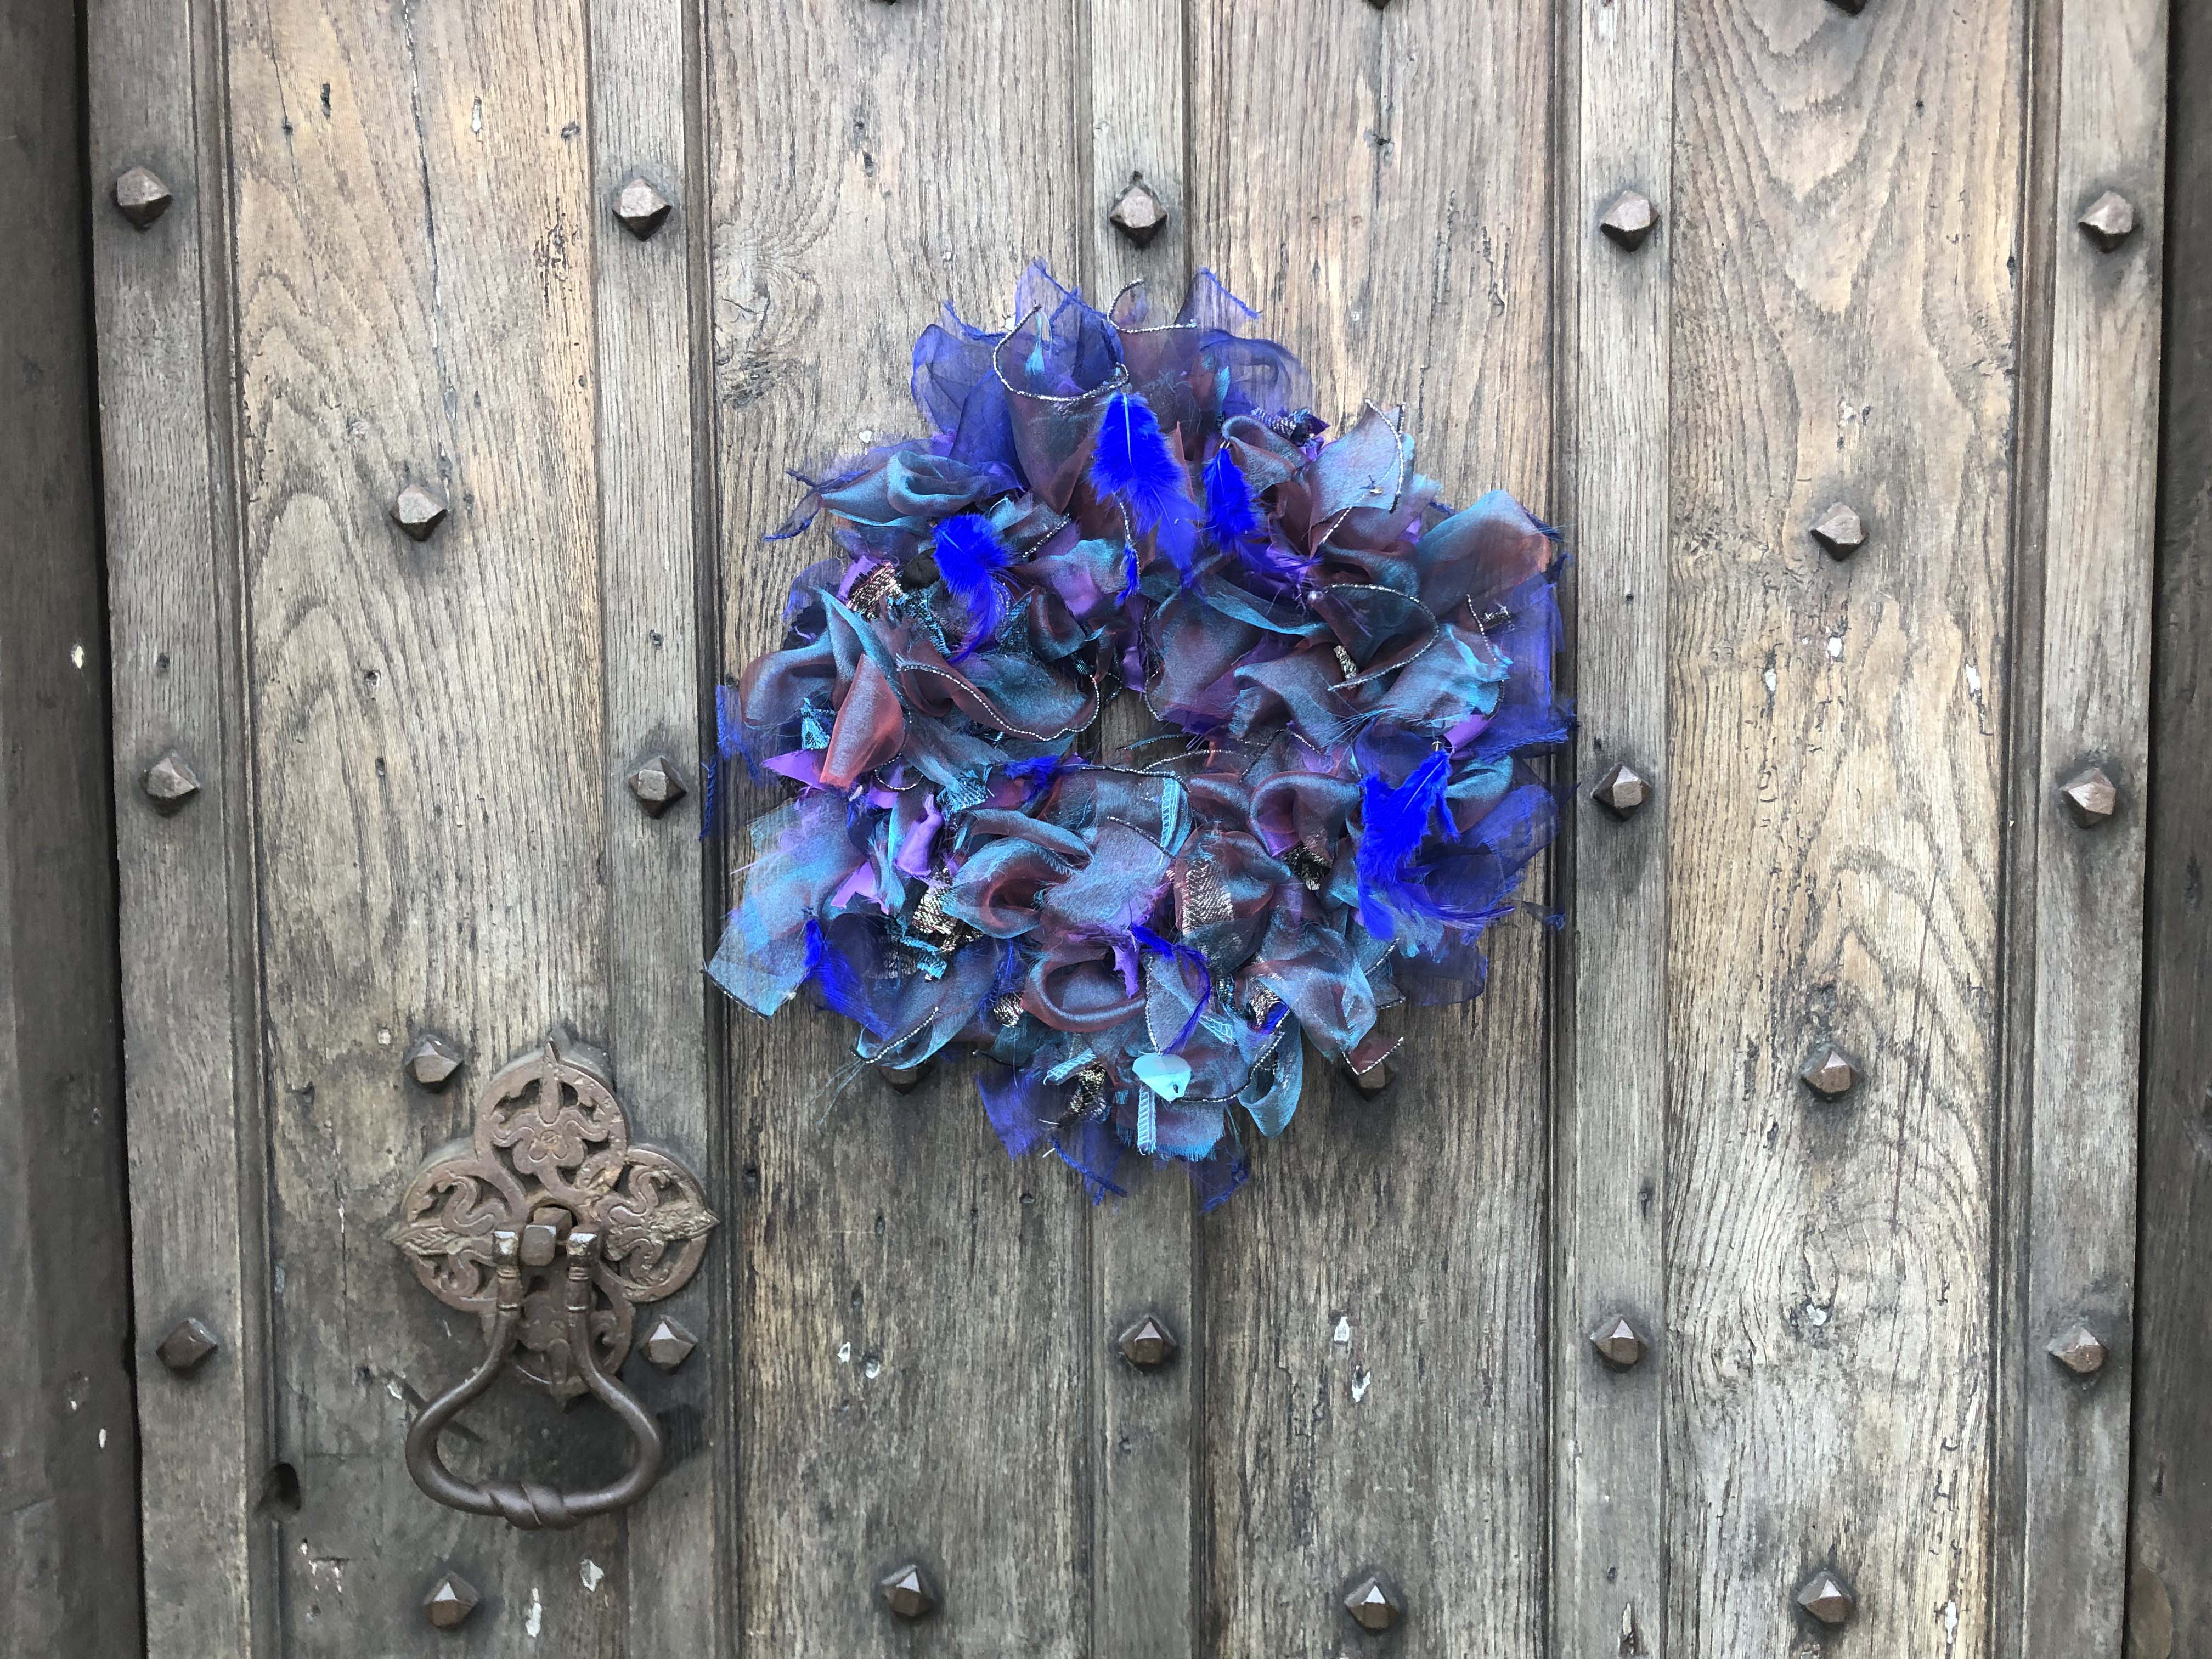 Purple and blue upcycled rag wreath made using an old halloween costume with feathers and shiny voile. 